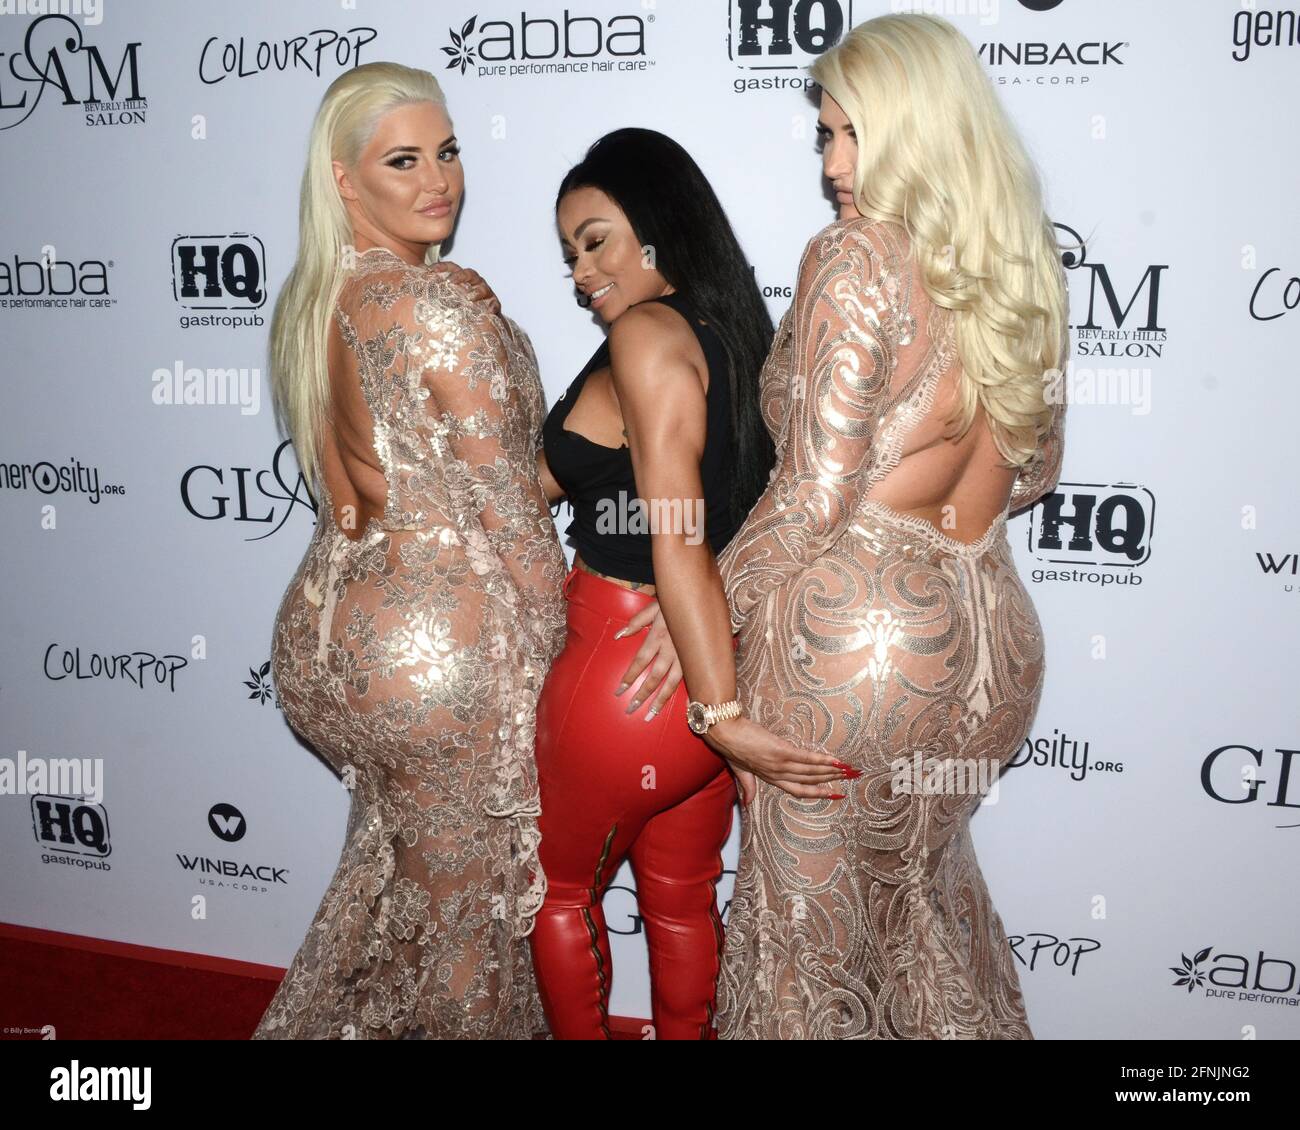 November 19, 2015, Beverly Hills, California, USA: Kristina Shannon, Blac Chyna and Karissa Shannon attend the GLAM Beverly Hills Salon Grand Opening celebration and Ribbon Cutting ceremony. (Credit Image: © Billy Bennight/ZUMA Wire) Stock Photo